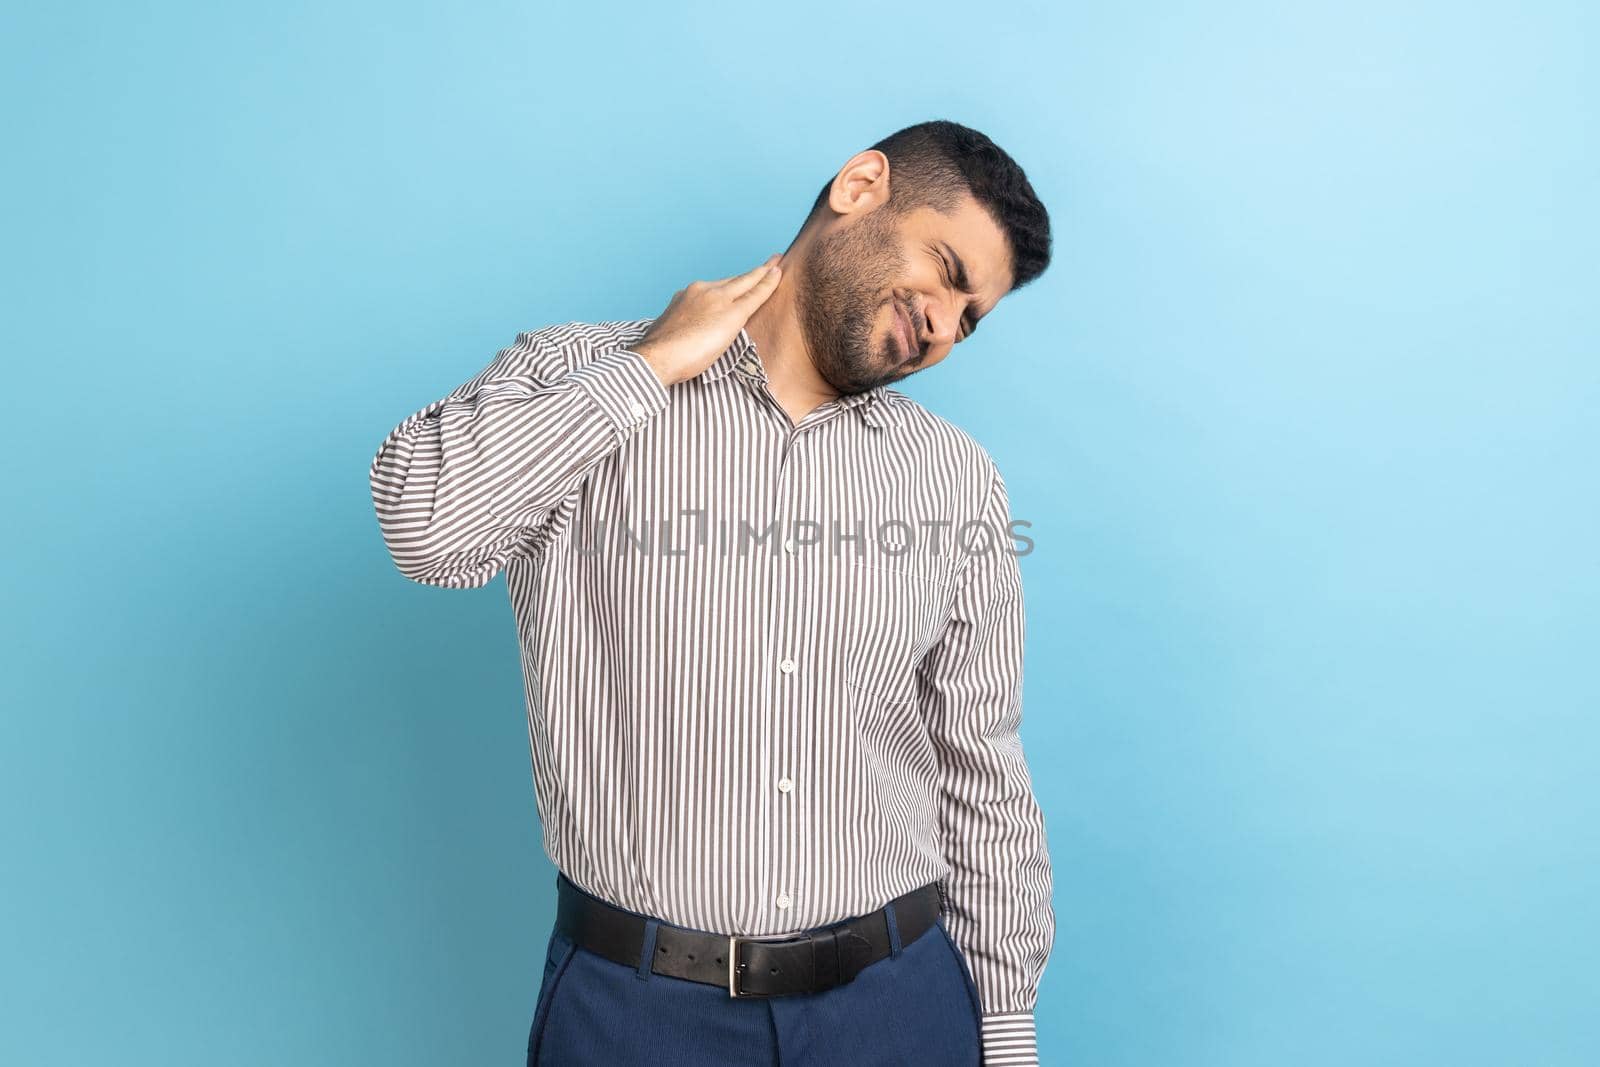 Anxious upset businessman massaging numb neck feeling pain, muscles tension, uncomfortable sleeping conditions, wearing striped shirt. Indoor studio shot isolated on blue background.